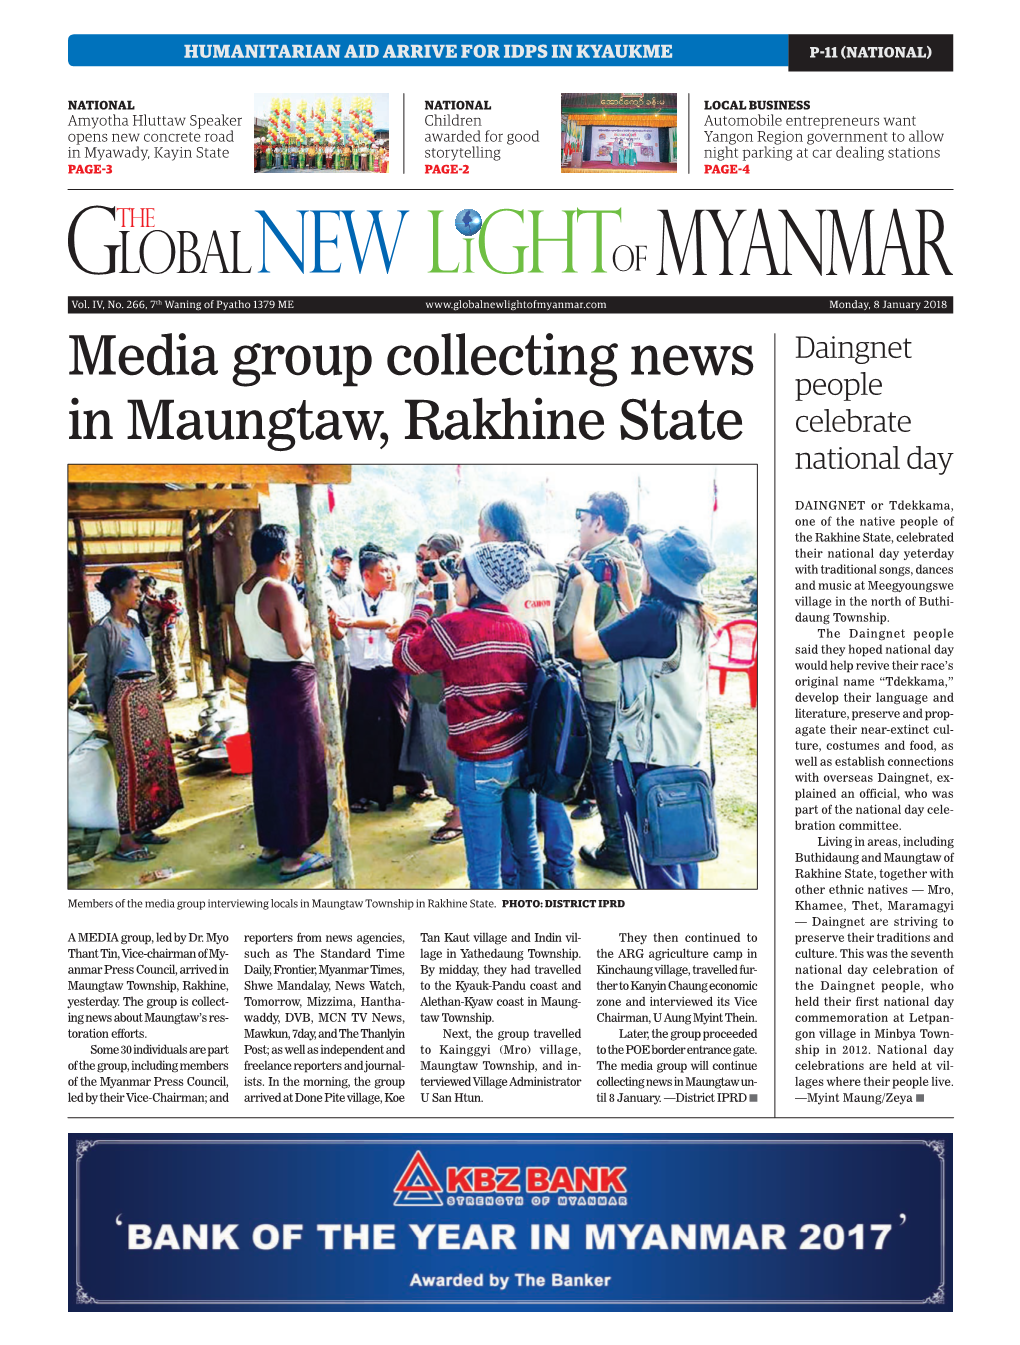 Media Group Collecting News in Maungtaw, Rakhine State